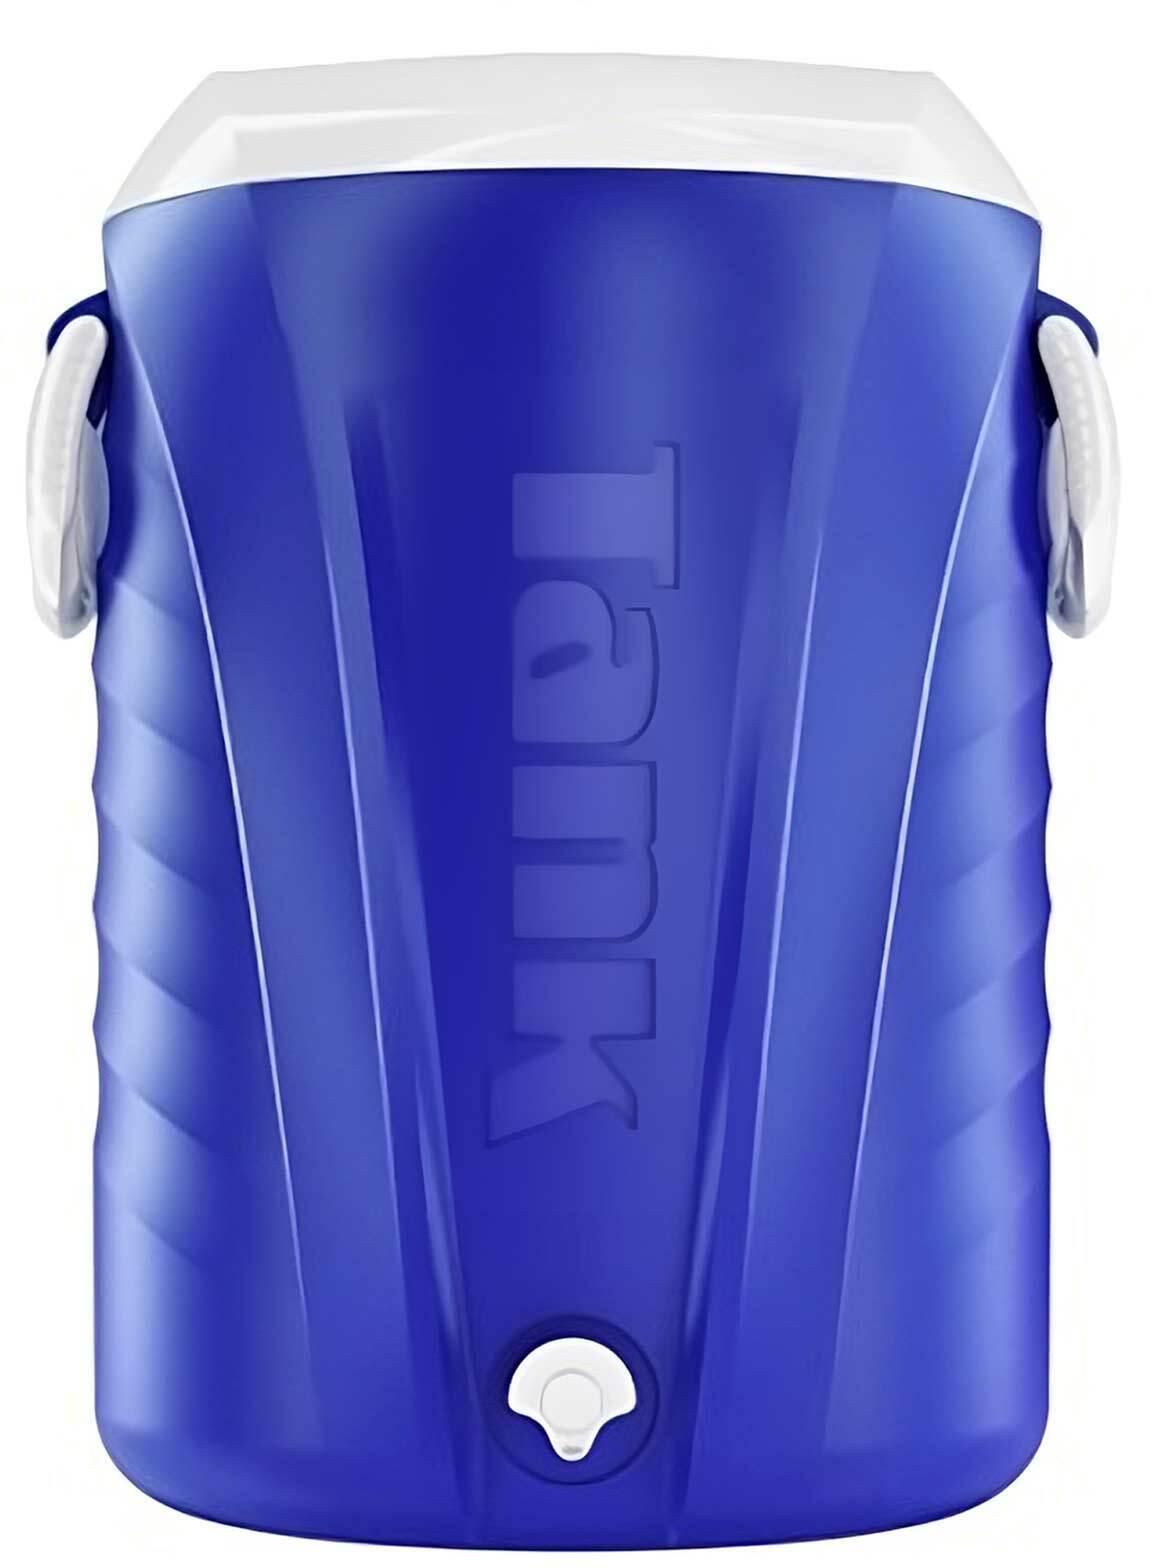 Tank Ice Tank with Micro-Filter - 45 Liter - Blue